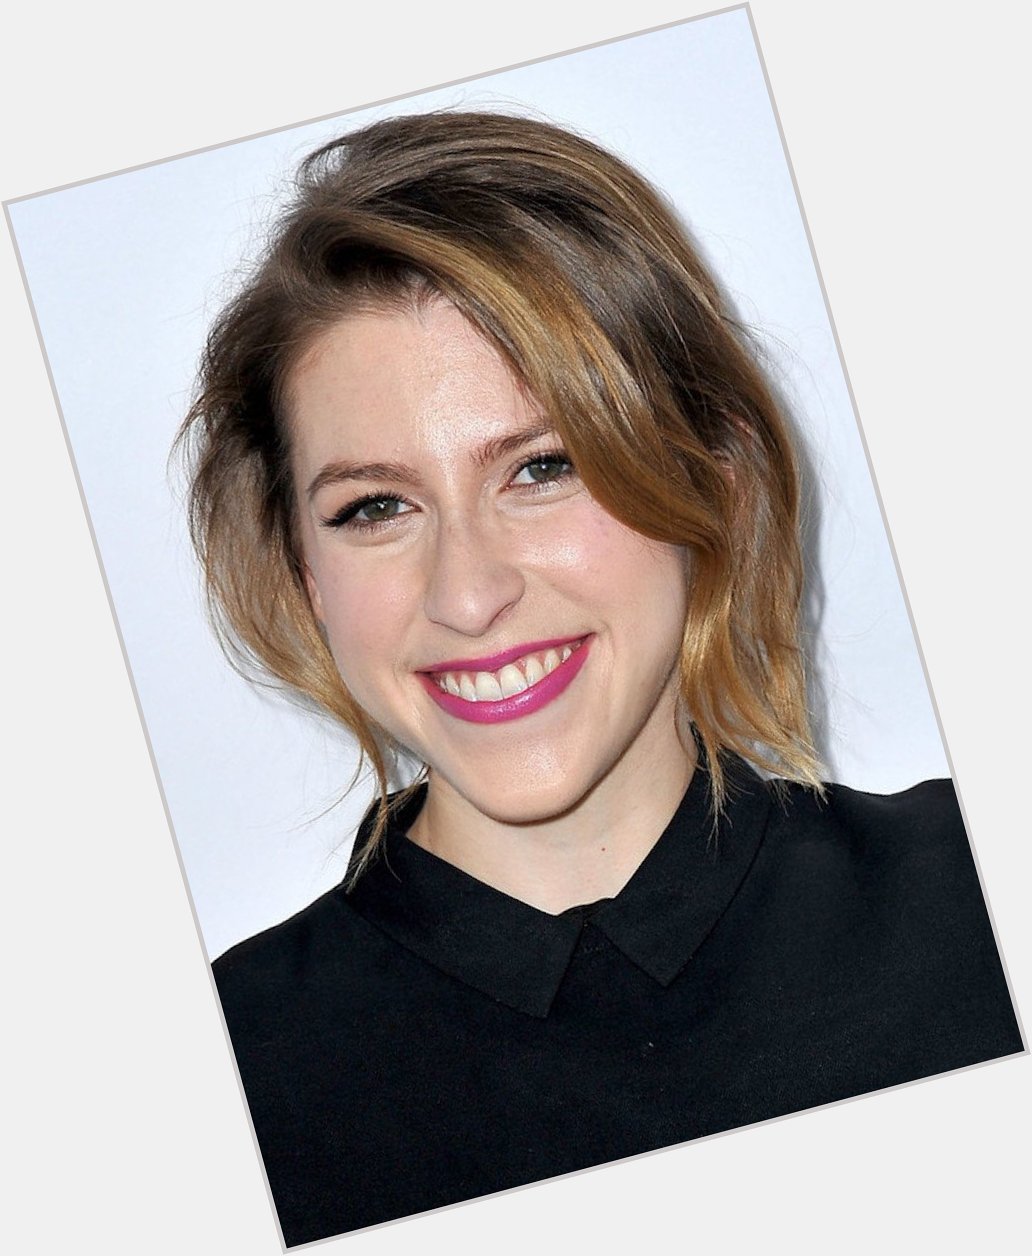 Happy 30th birthday to (Eden Sher)! The actress who played Sue Heck from The Middle 